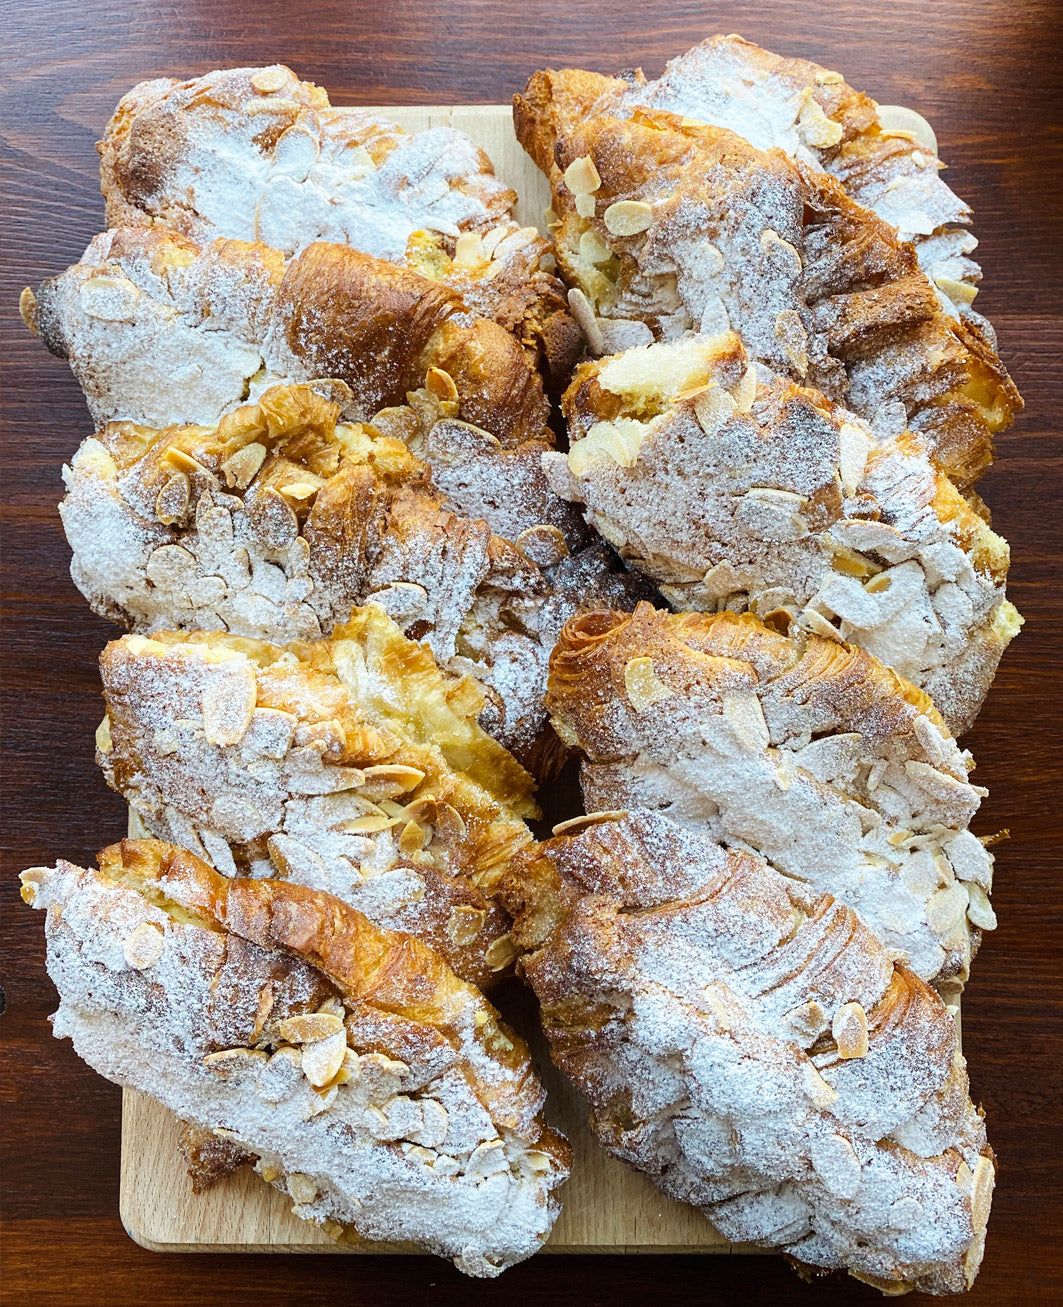 Plate of almond croissants